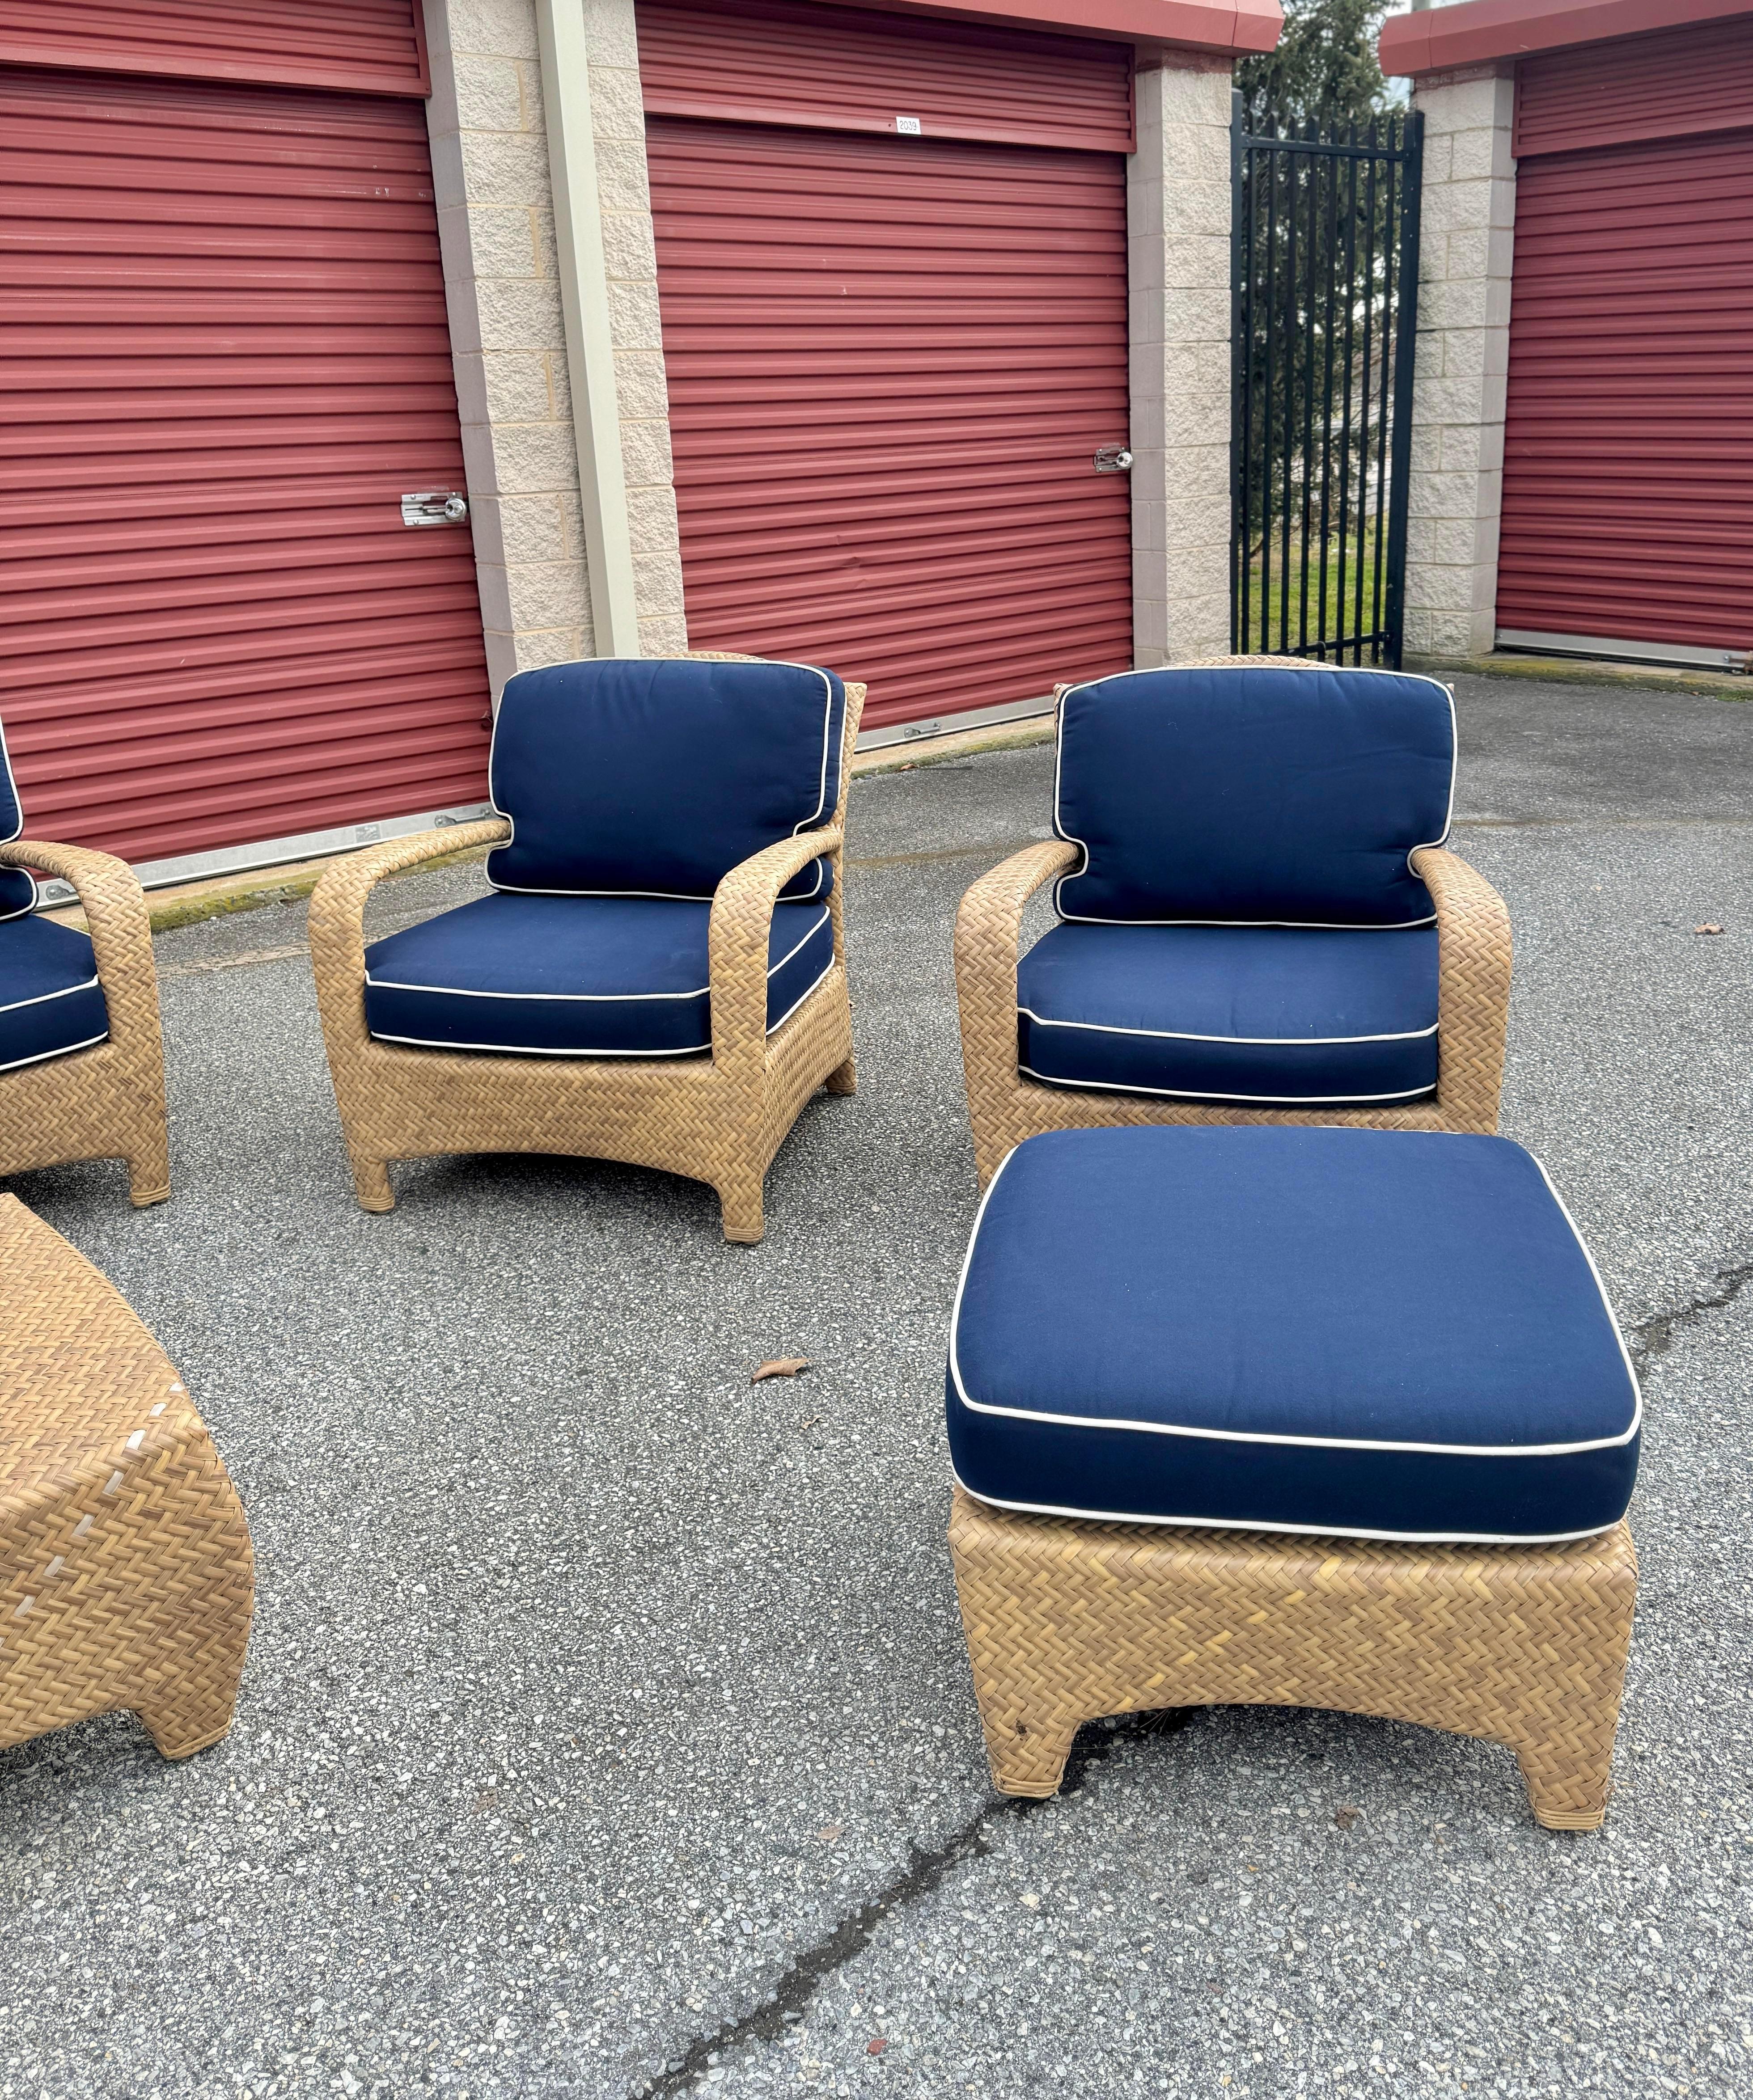 Modern Late 20th Century Wicker Sculptural Patio Seating & Tables, 8 Pieces For Sale